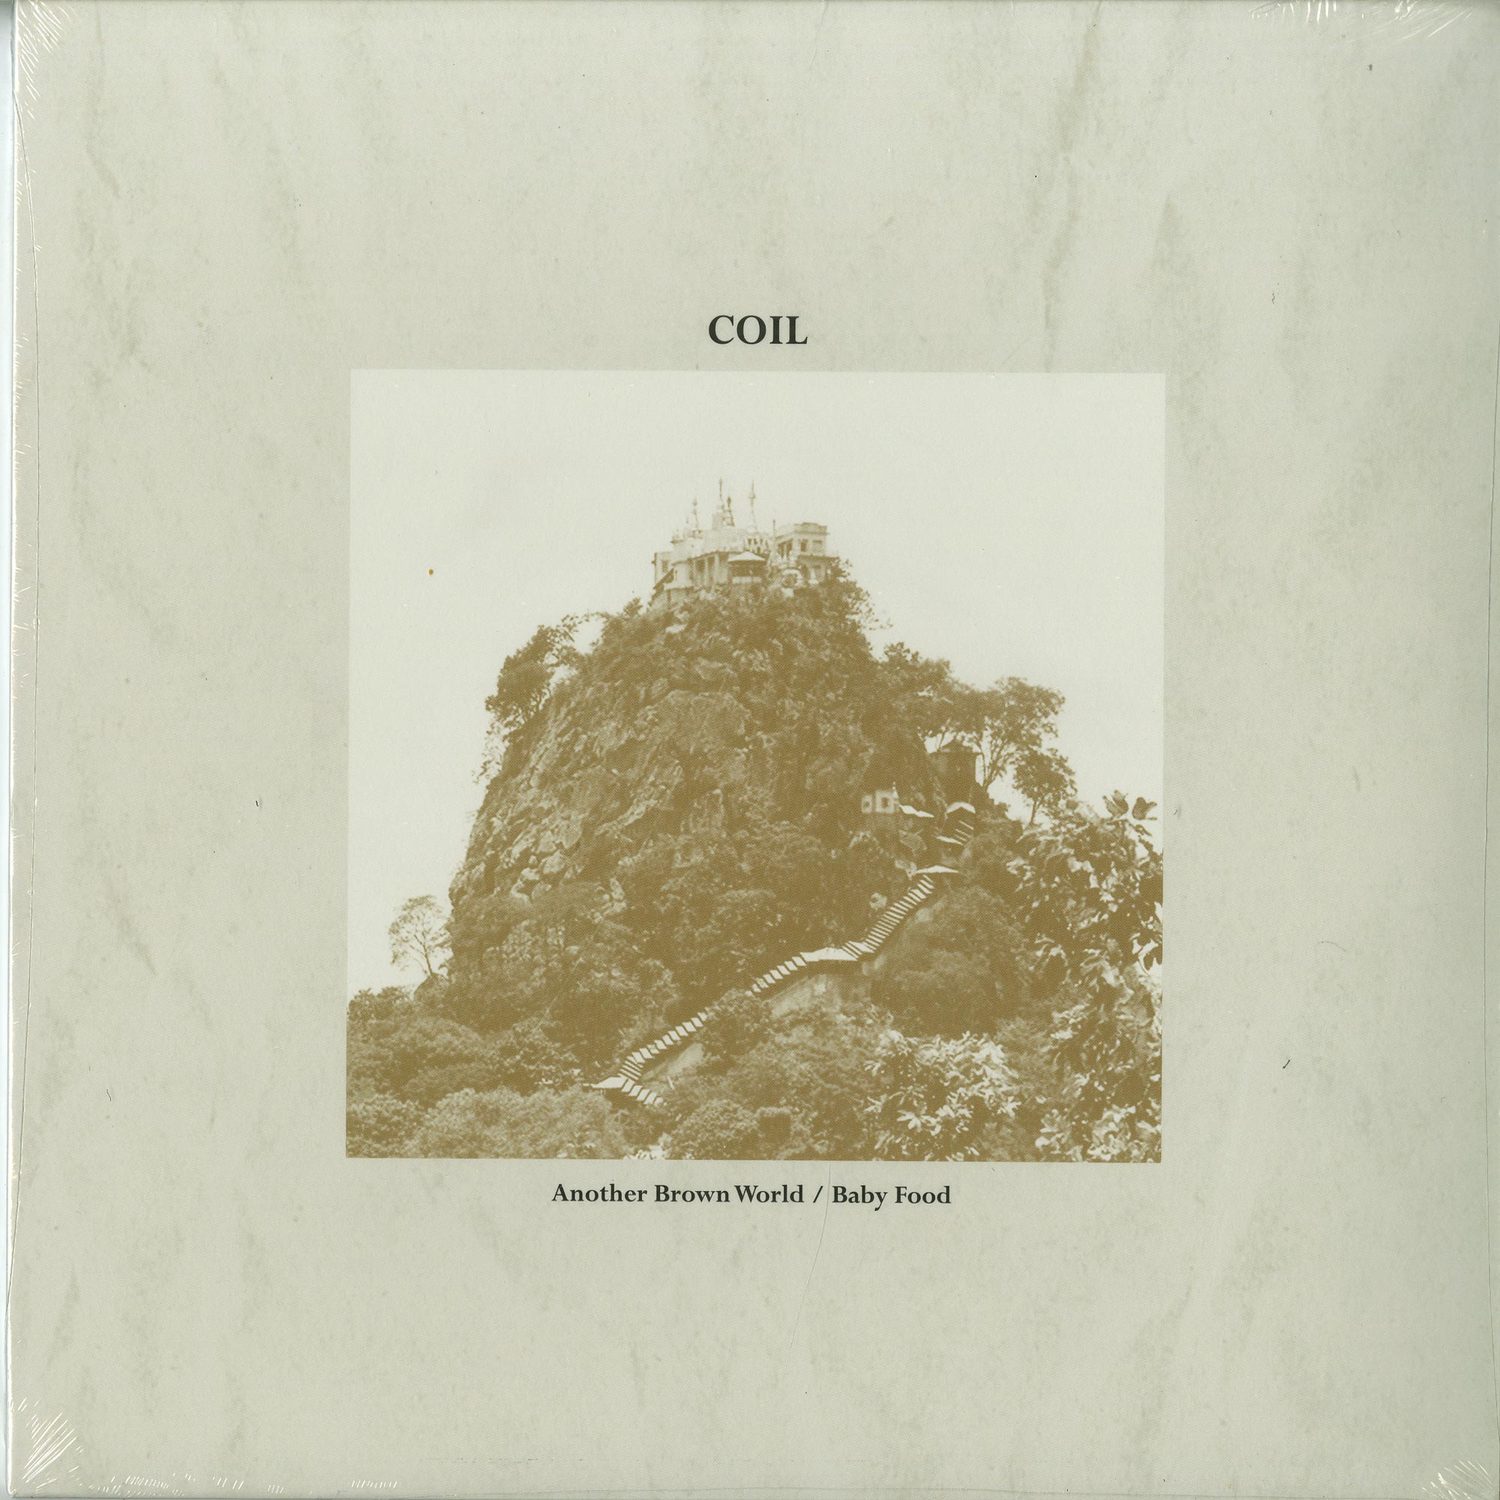 Coil - ANOTHER BROWN WORLD / BABY FOOD 